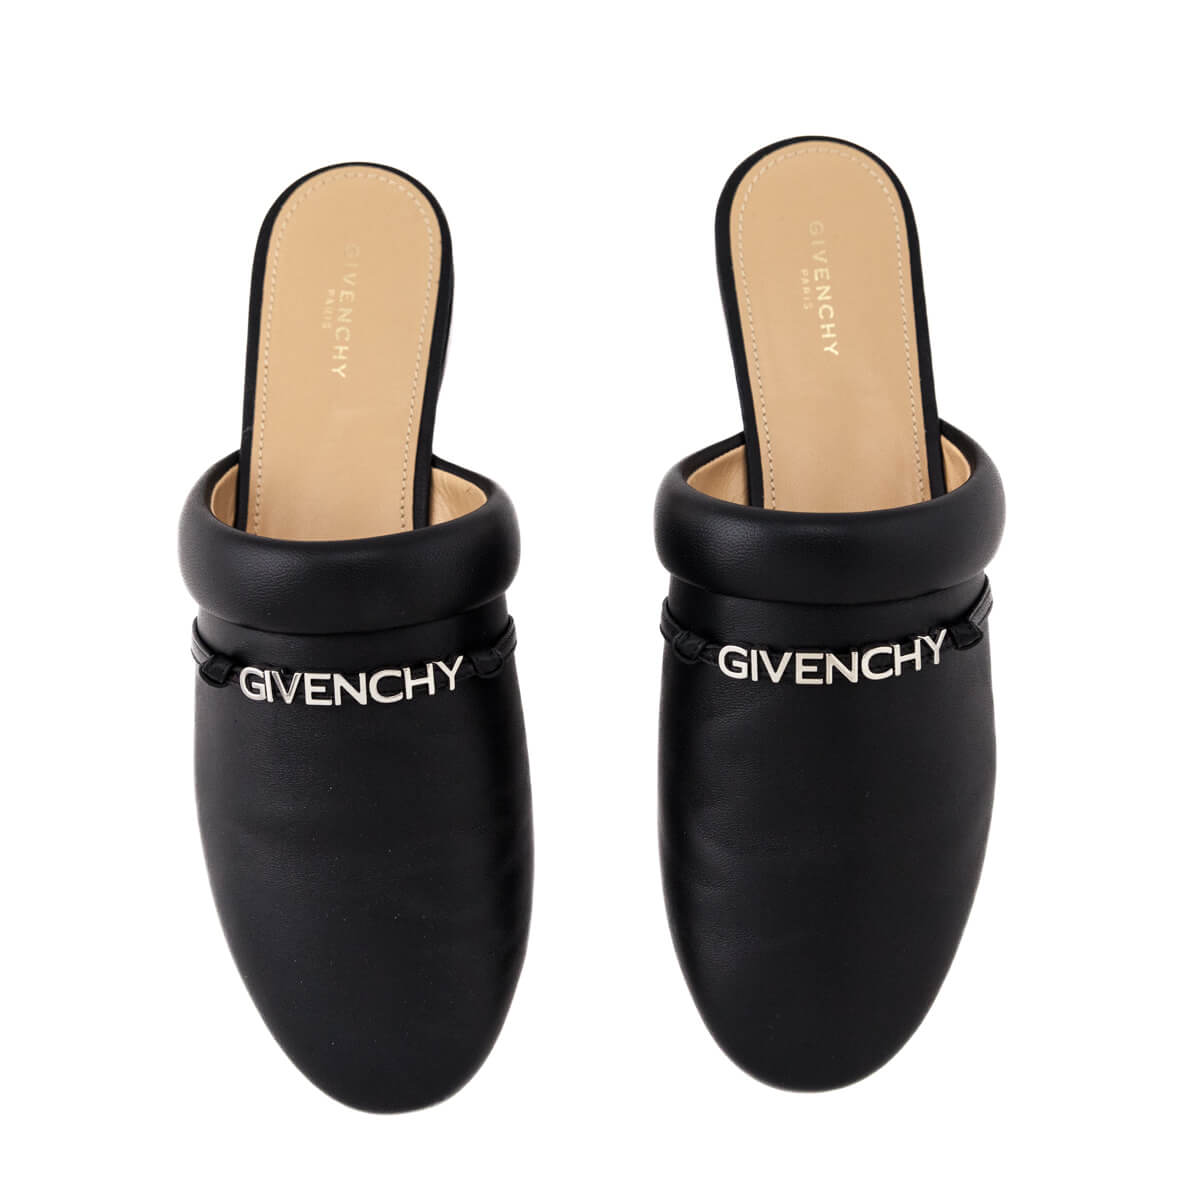 Givenchy Black Leather Elba Mules Size US 9.5 | EU 39.5 - Love that Bag etc - Preowned Authentic Designer Handbags & Preloved Fashions